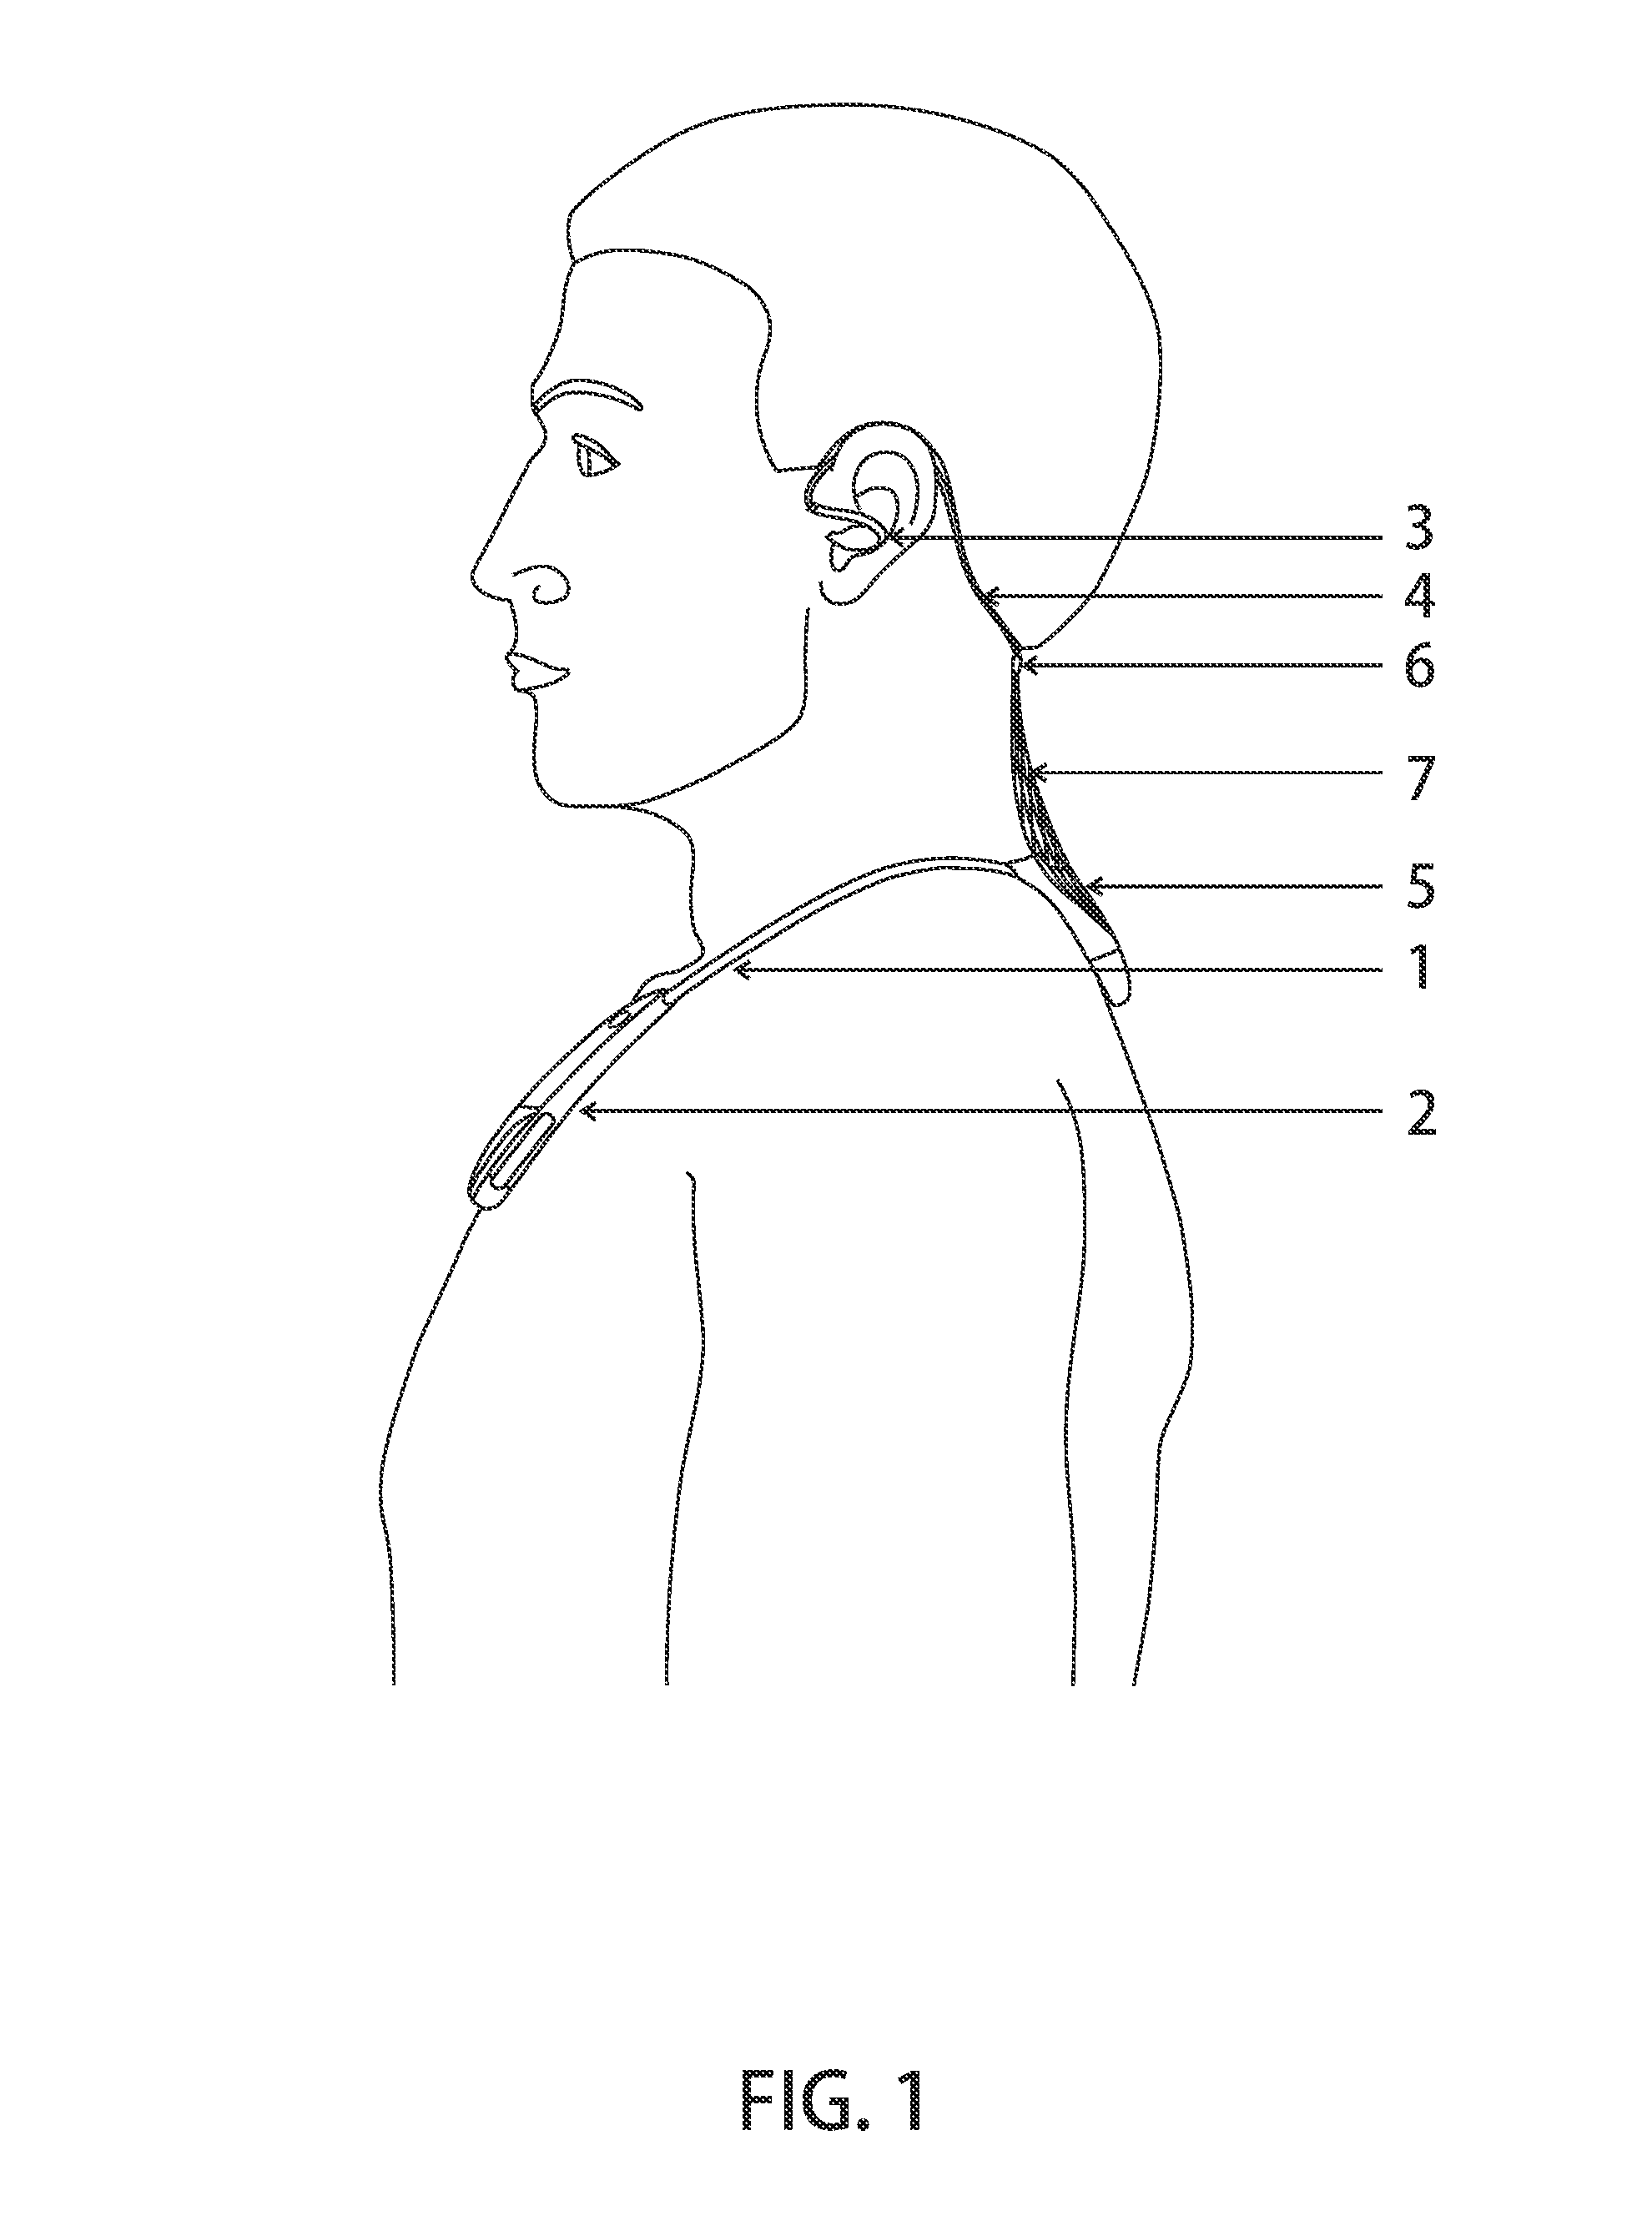 Neck-wearable communication device with microphone array